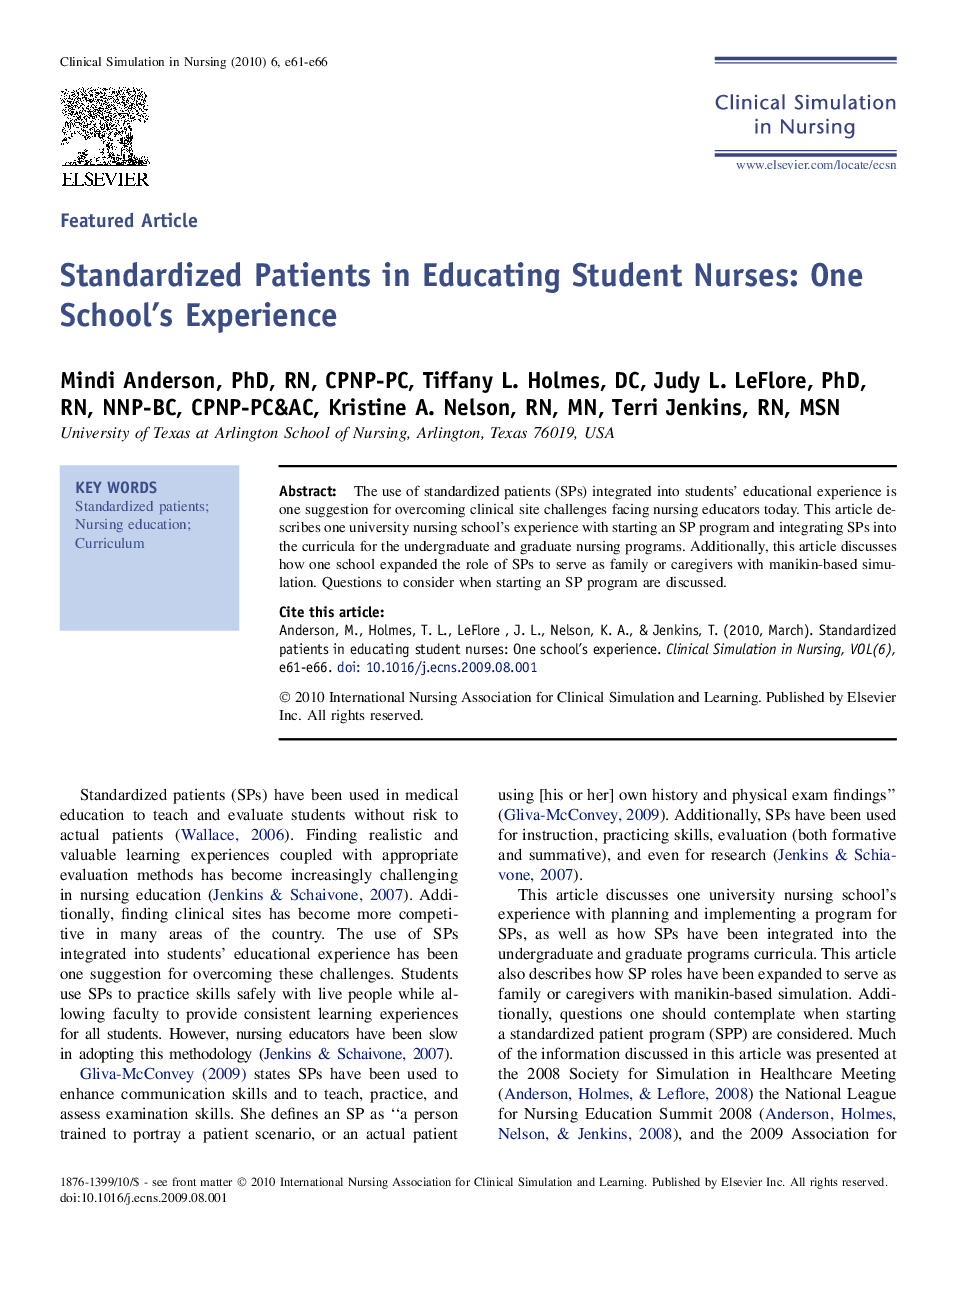 Standardized Patients in Educating Student Nurses: One School's Experience 